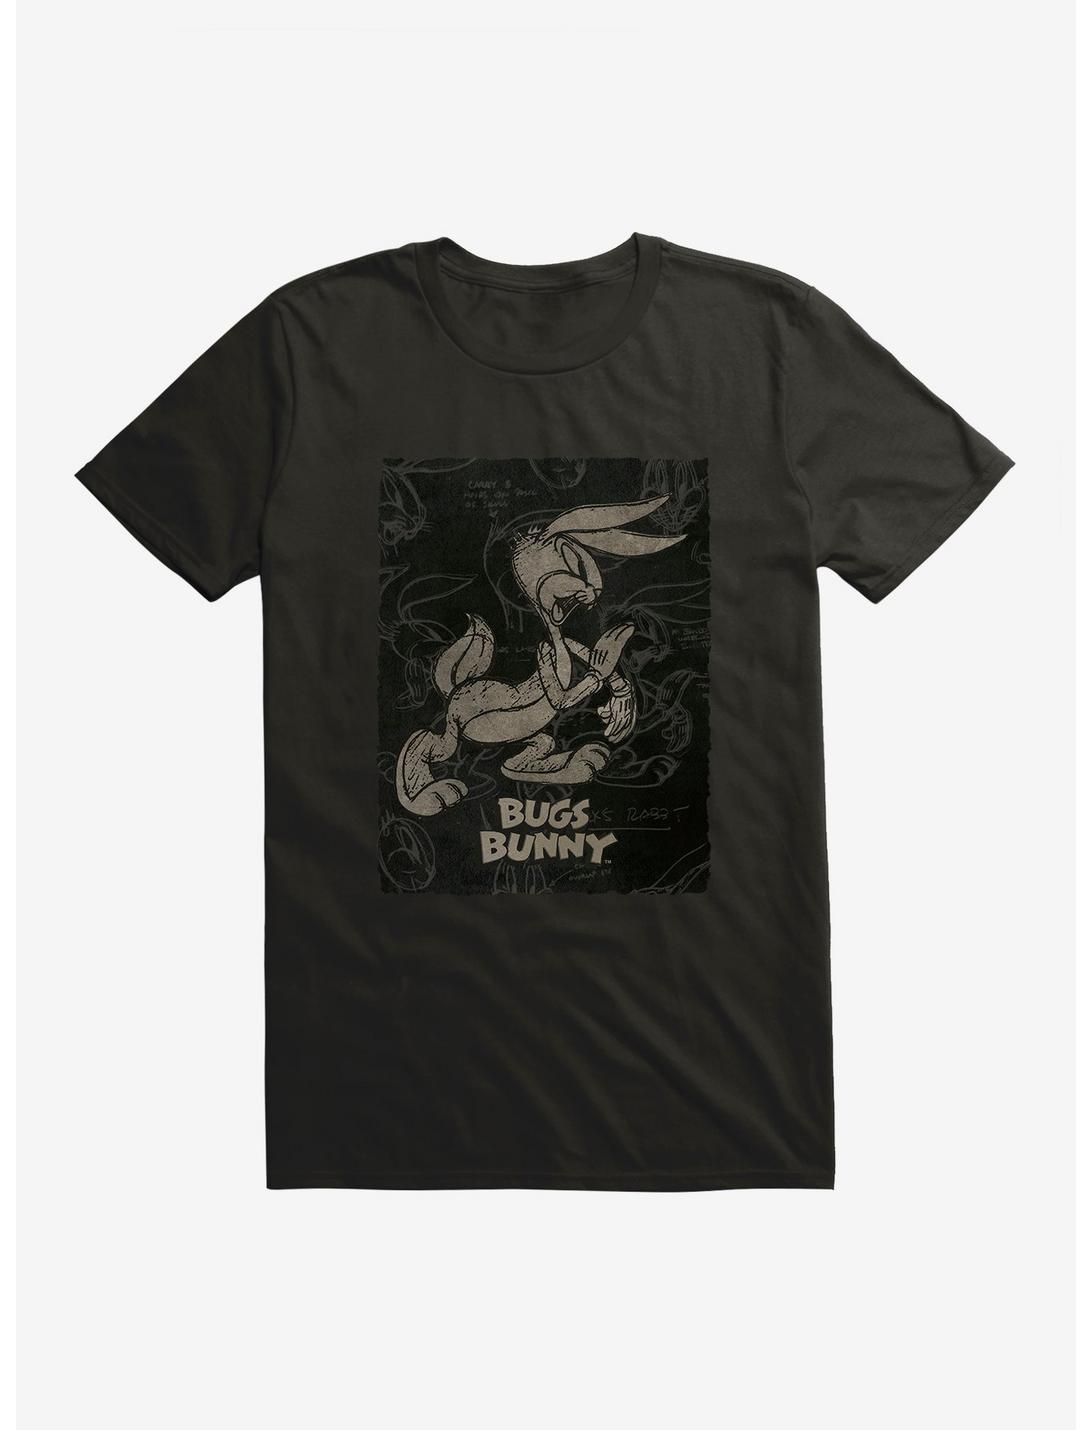 Looney Tunes Merrie Melodies Bugs Bunny Classic Sketch T-Shirt, BLACK, hi-res